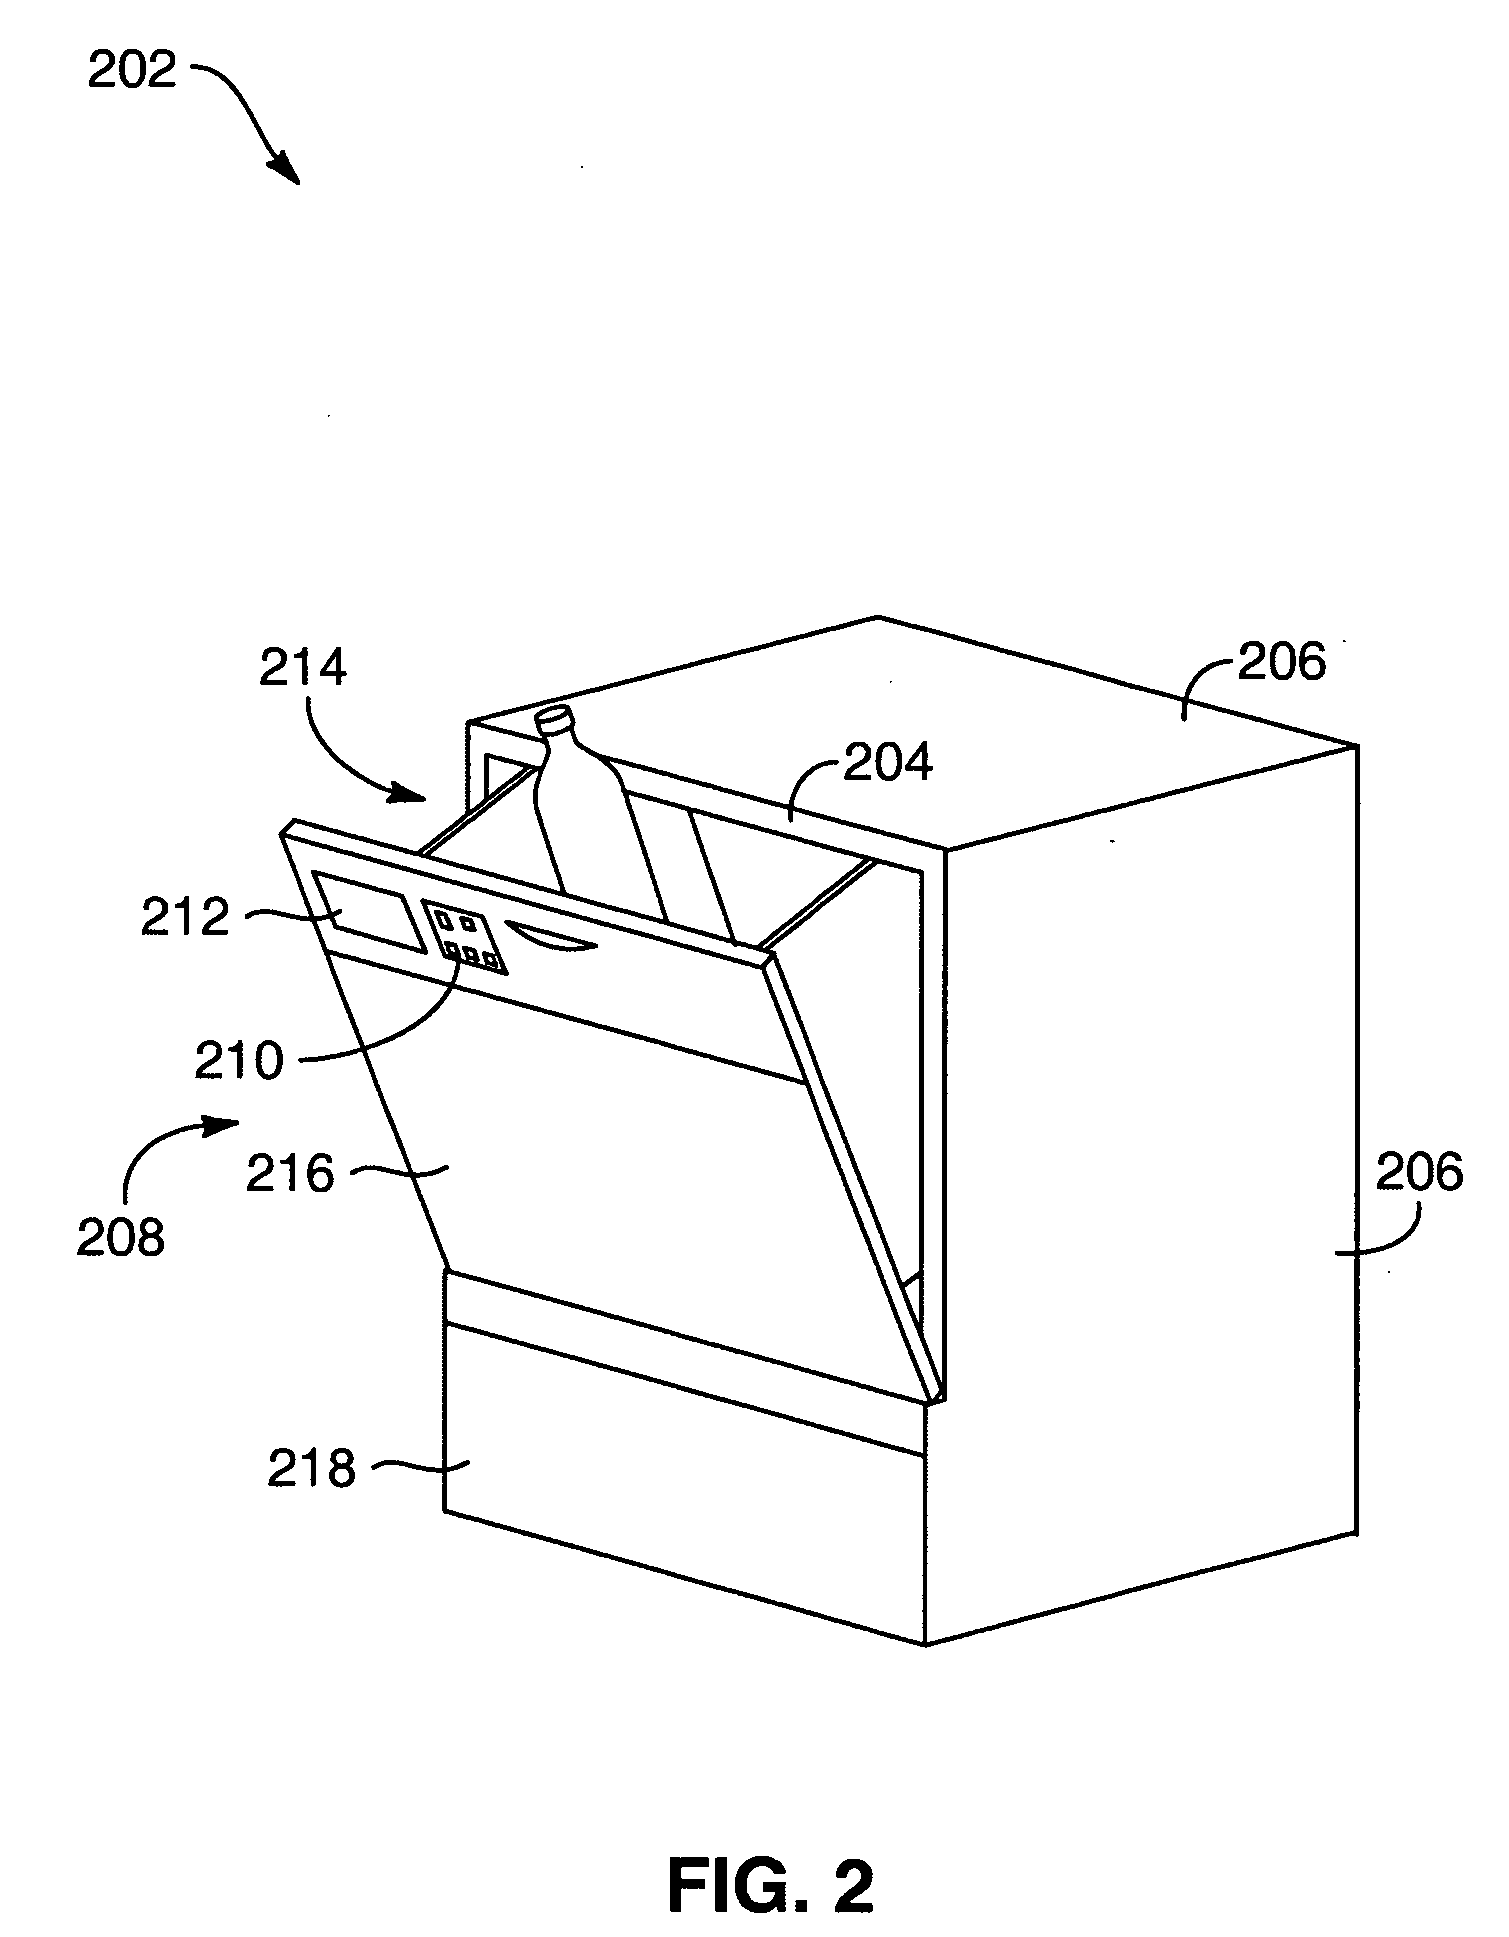 Apparatus, system, and method for condensing, separating and storing recyclable material